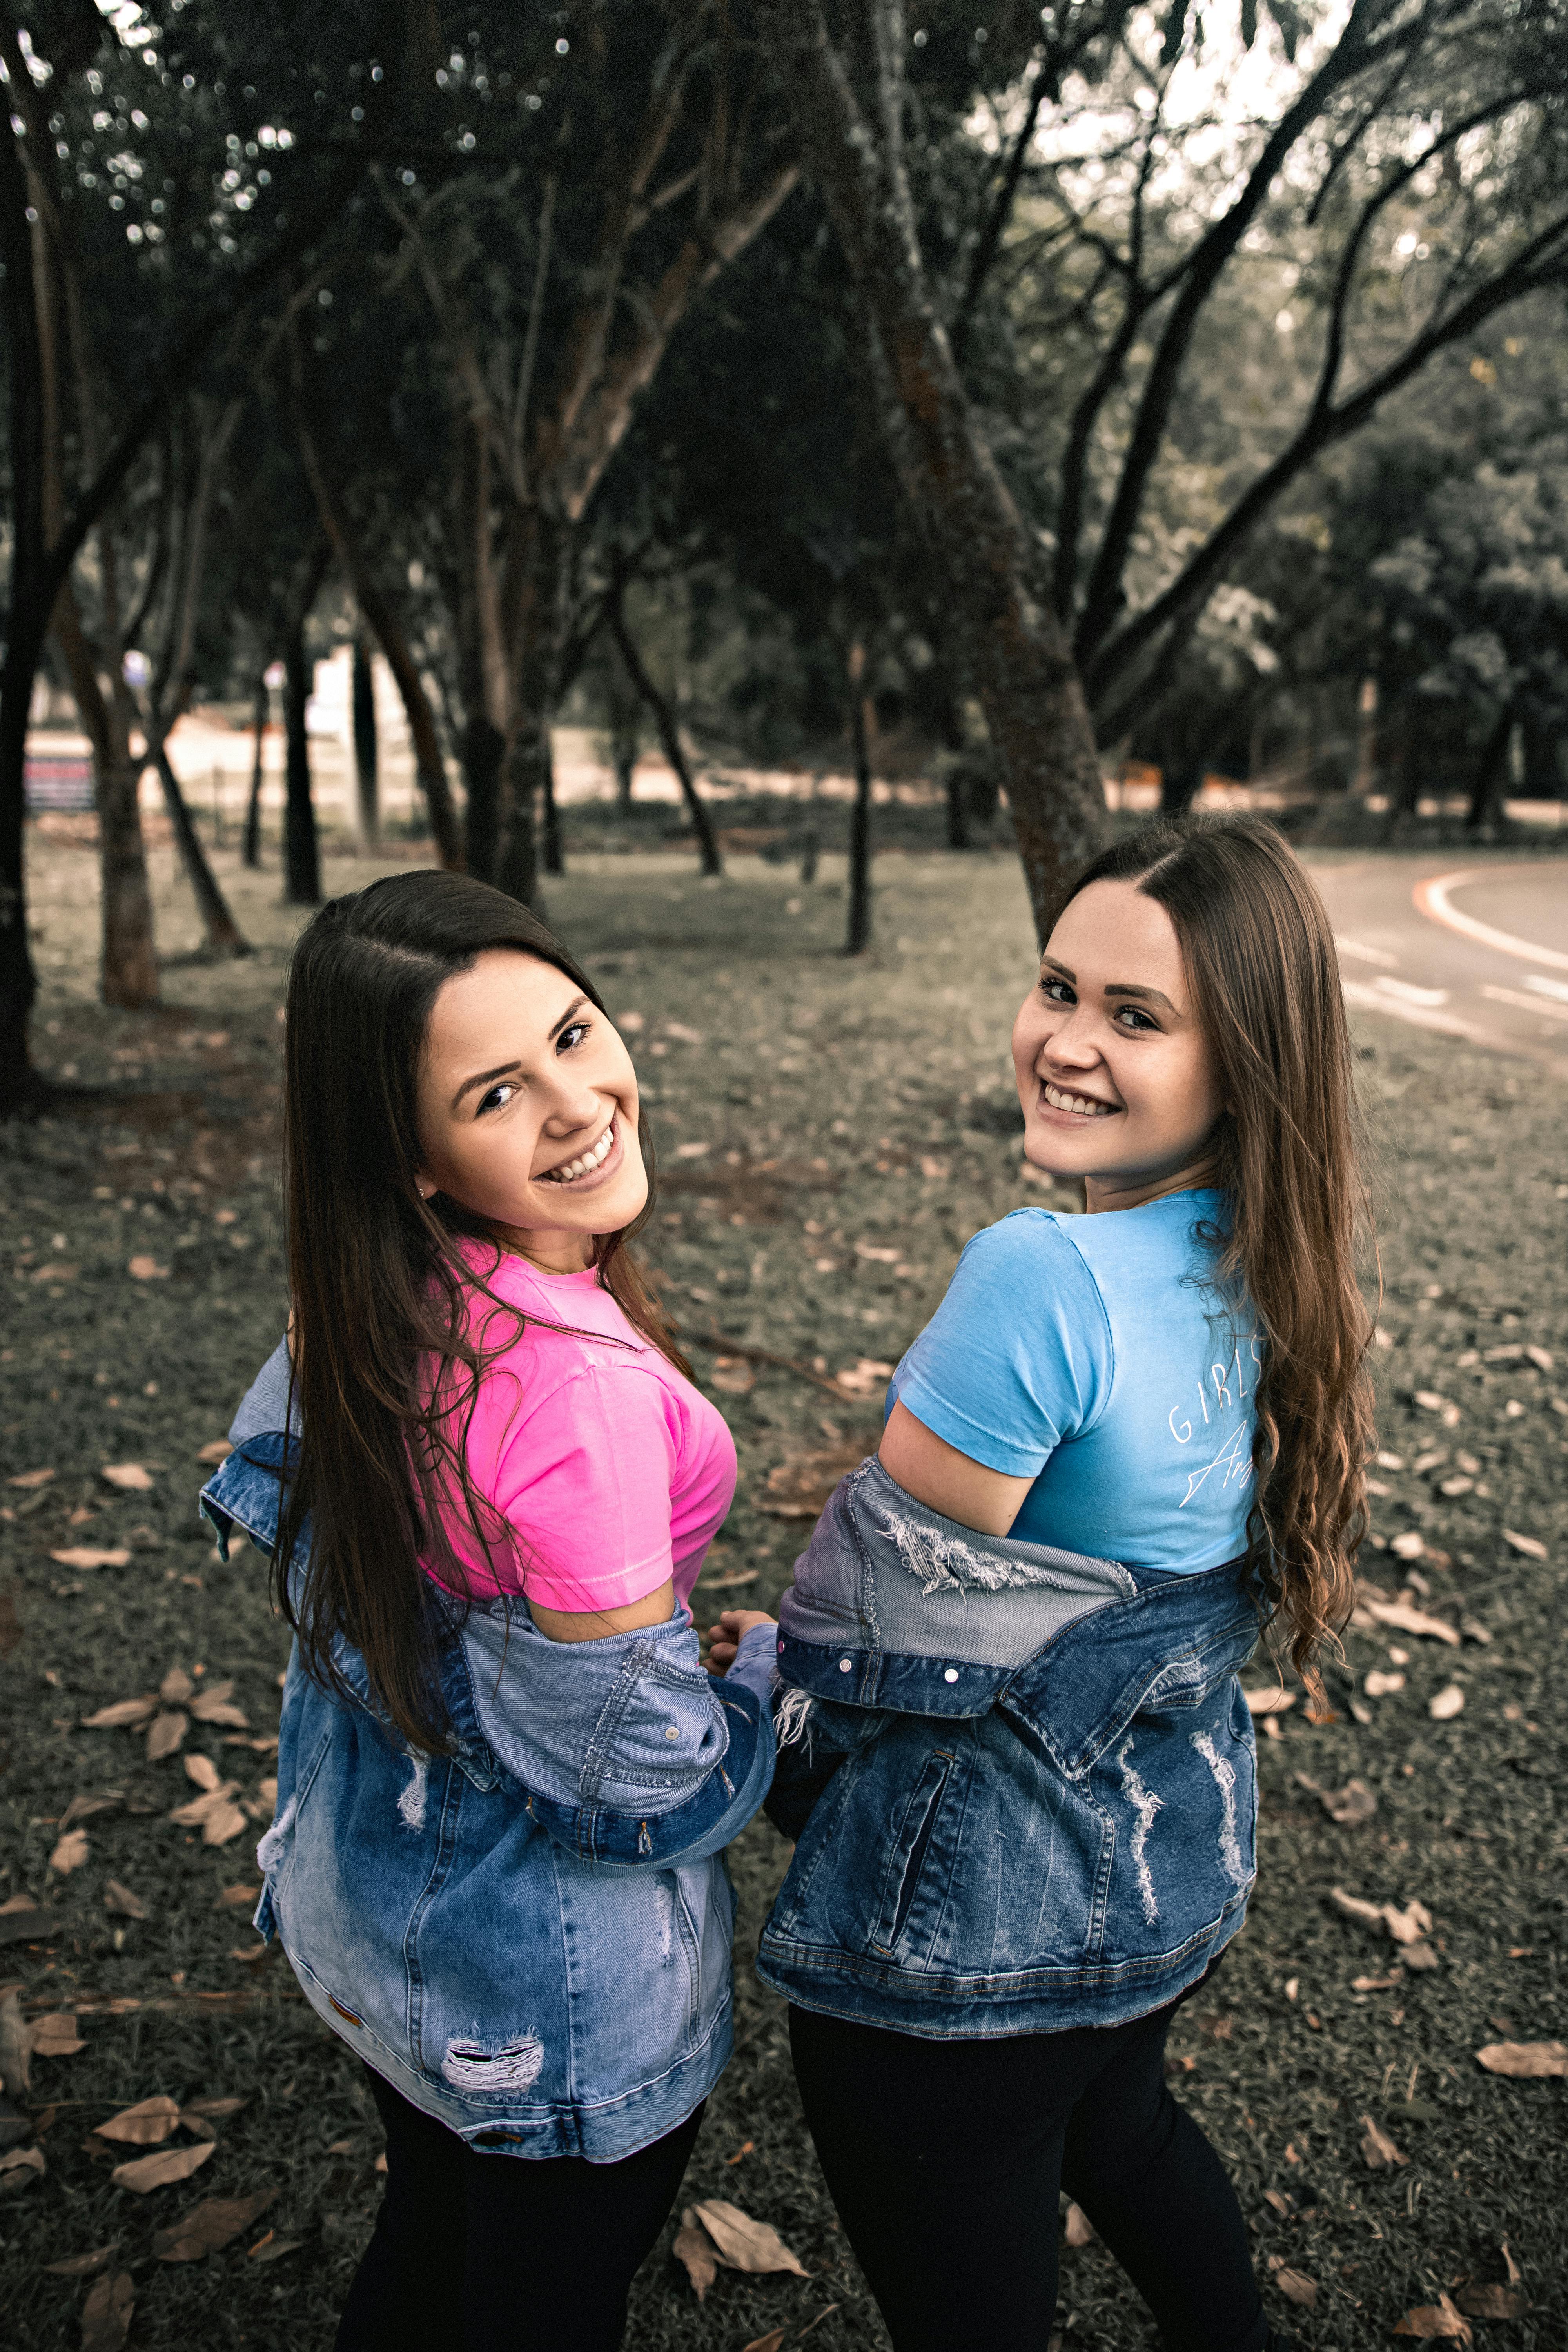 besties photo poses | 2 friends photo poses | sisters photo poses - YouTube